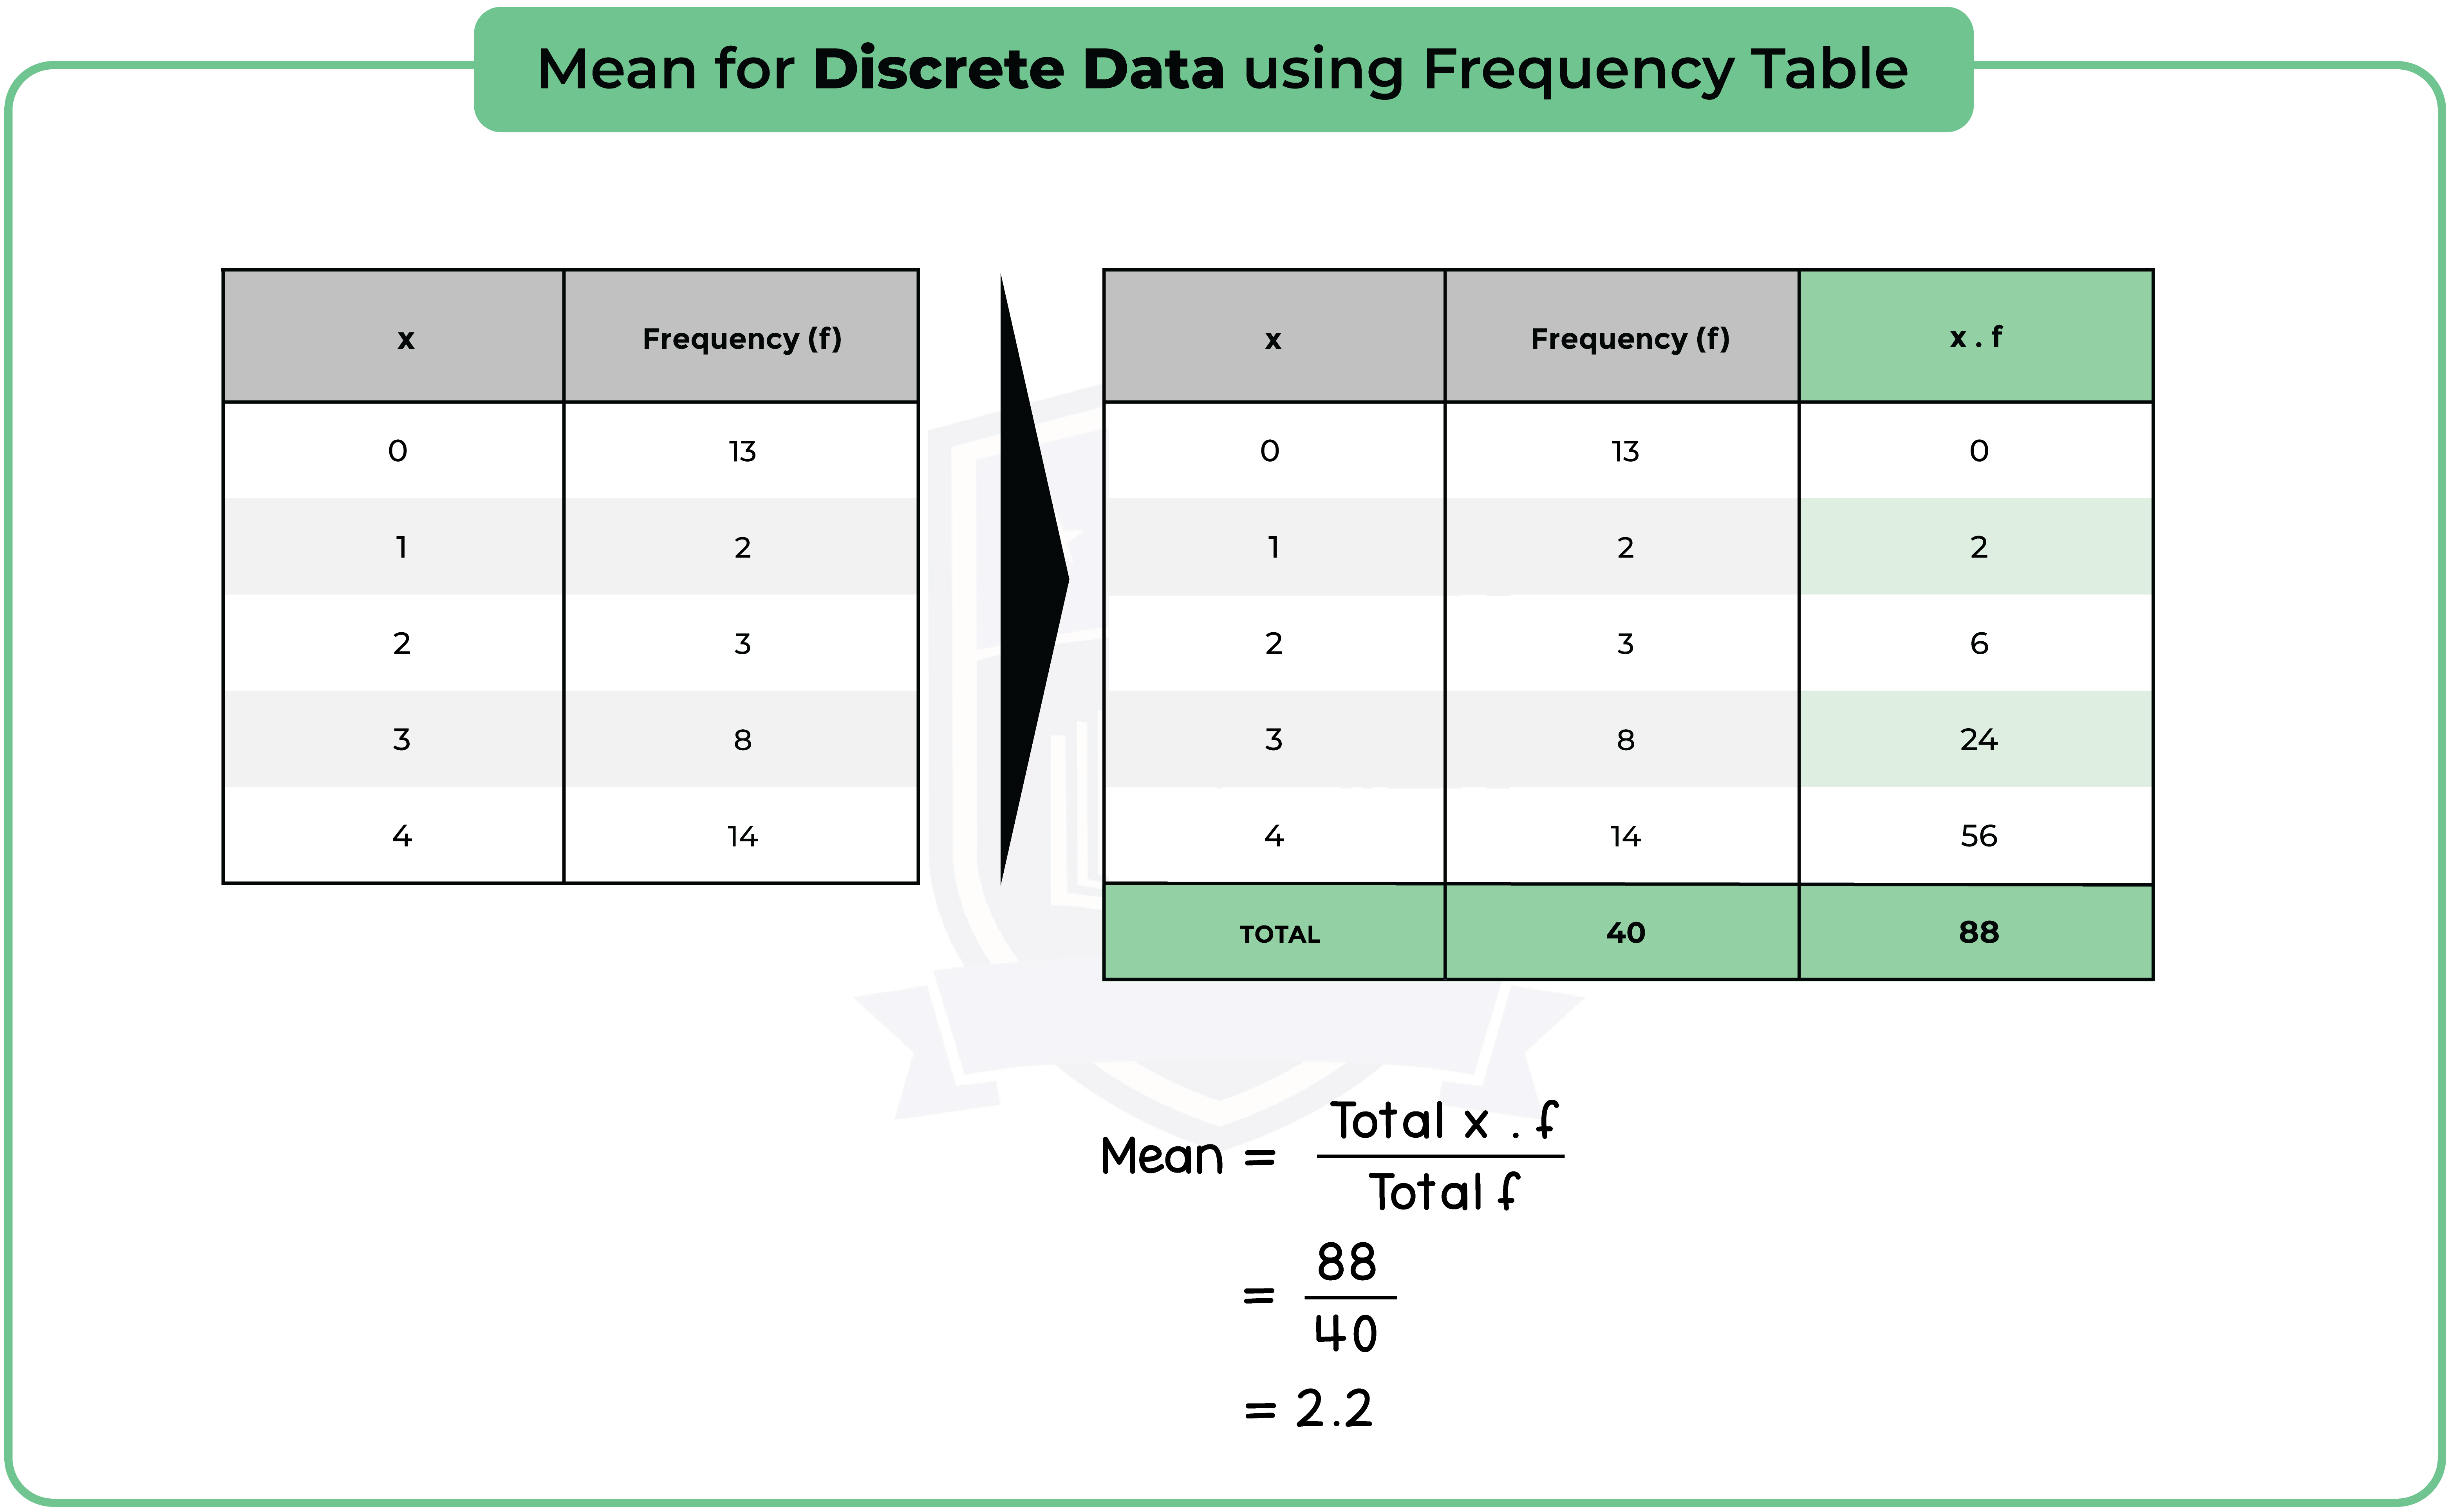 edexcel_igcse_mathematics a_topic 39_statistical measures_002_Mean for Discrete Data using Frequency Table